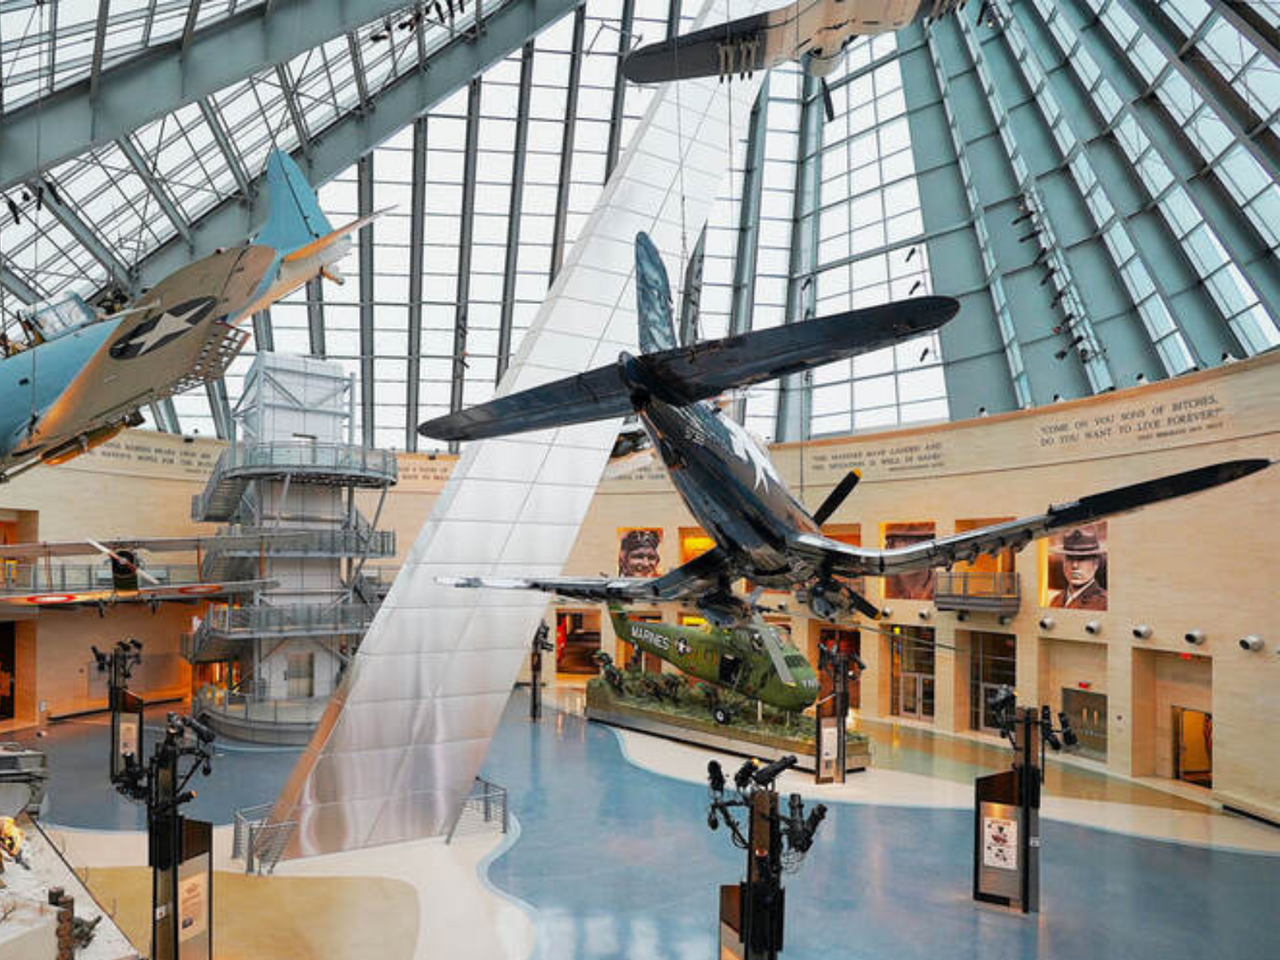 View of suspended airplanes in interior of National Museum of the Marine Corps